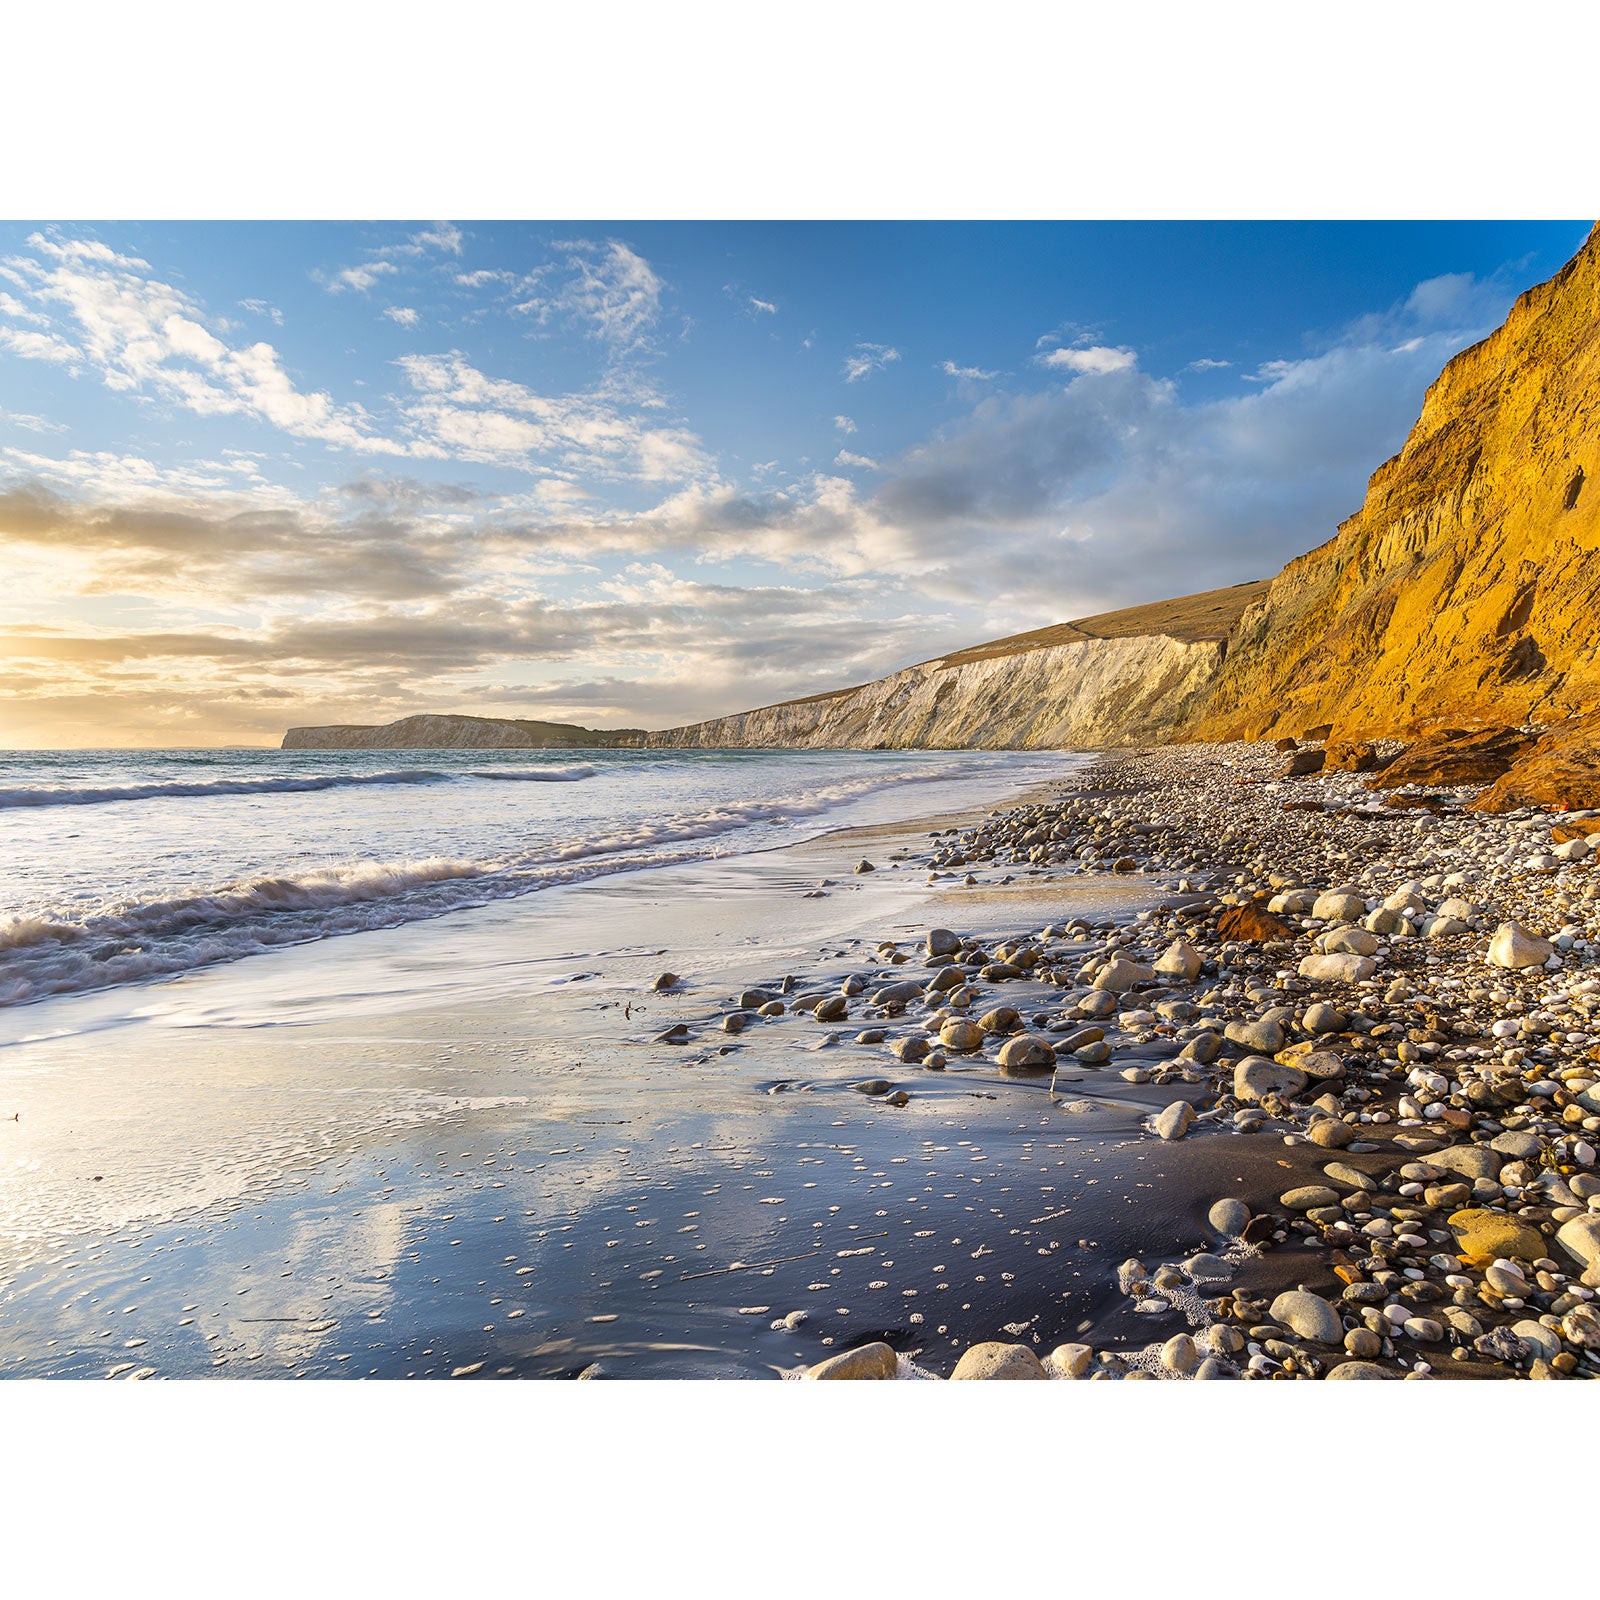 Sunset at Compton Bay, a pebbly beach with cliffs and reflective shoreline on the Isle of Wight by Available Light Photography.